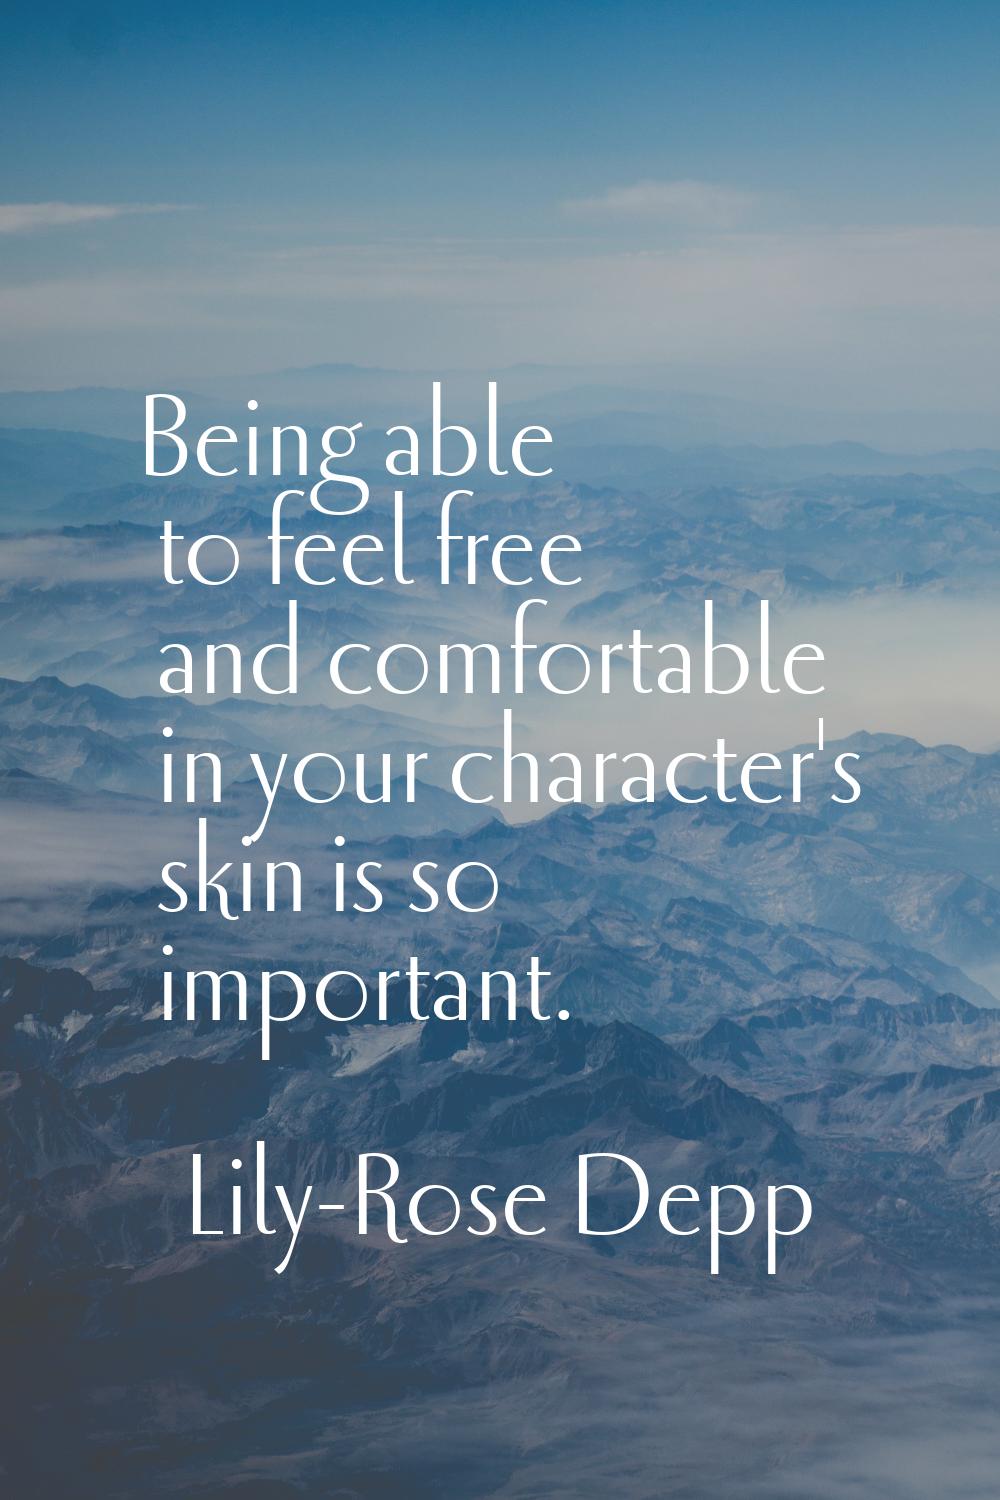 Being able to feel free and comfortable in your character's skin is so important.